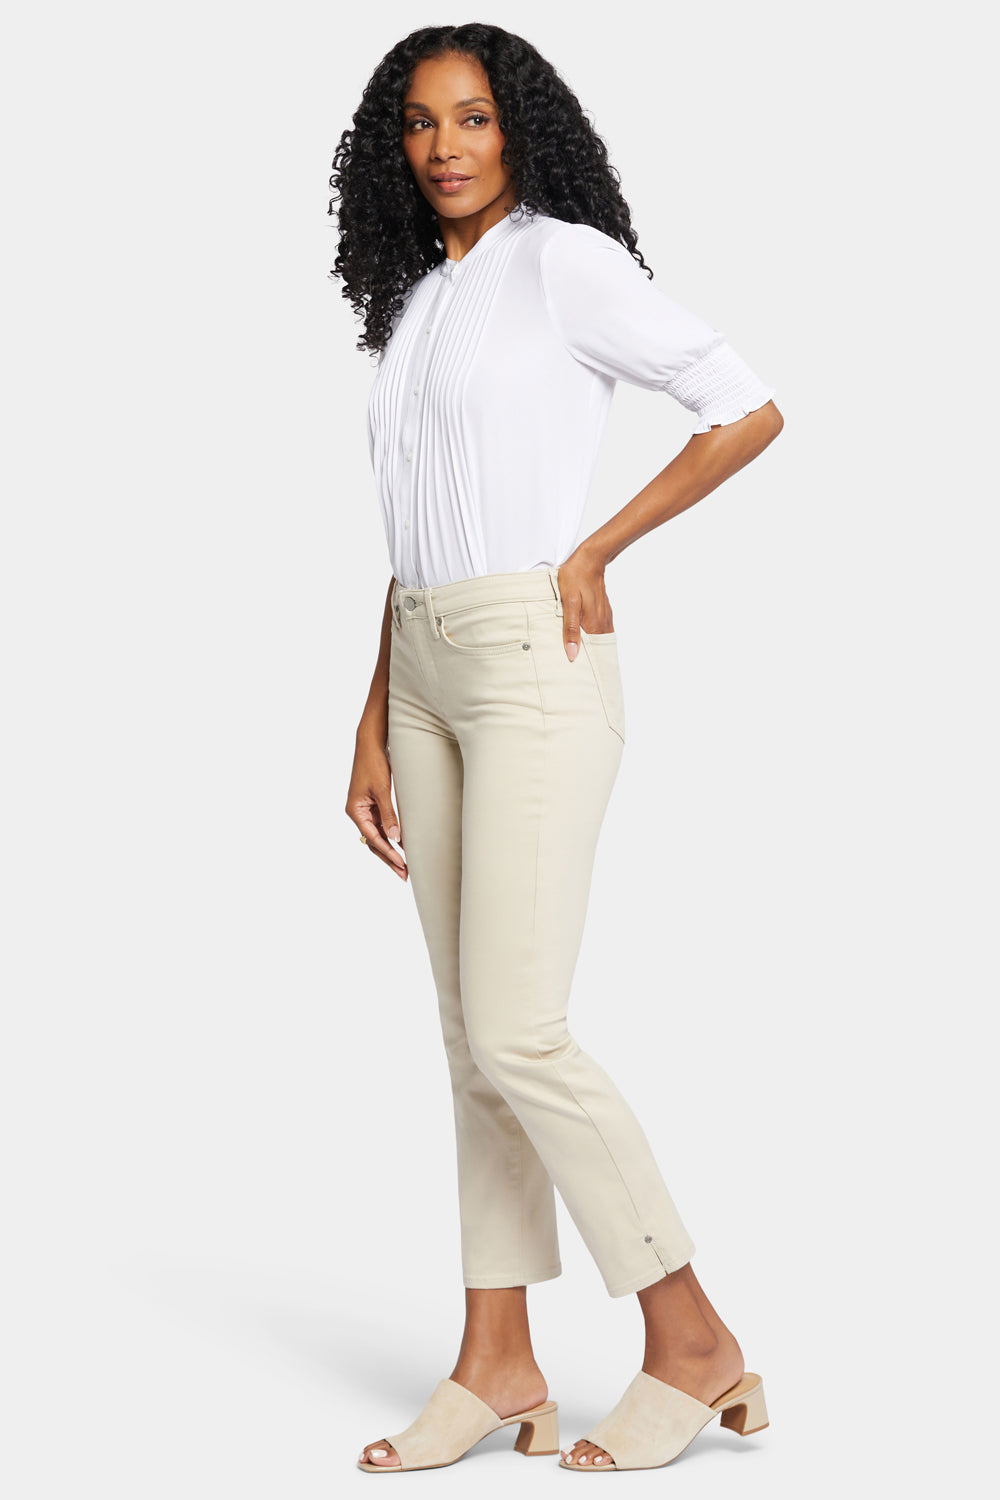 NYDJ Sheri Slim Ankle Jeans With Riveted Side Slits - Feather